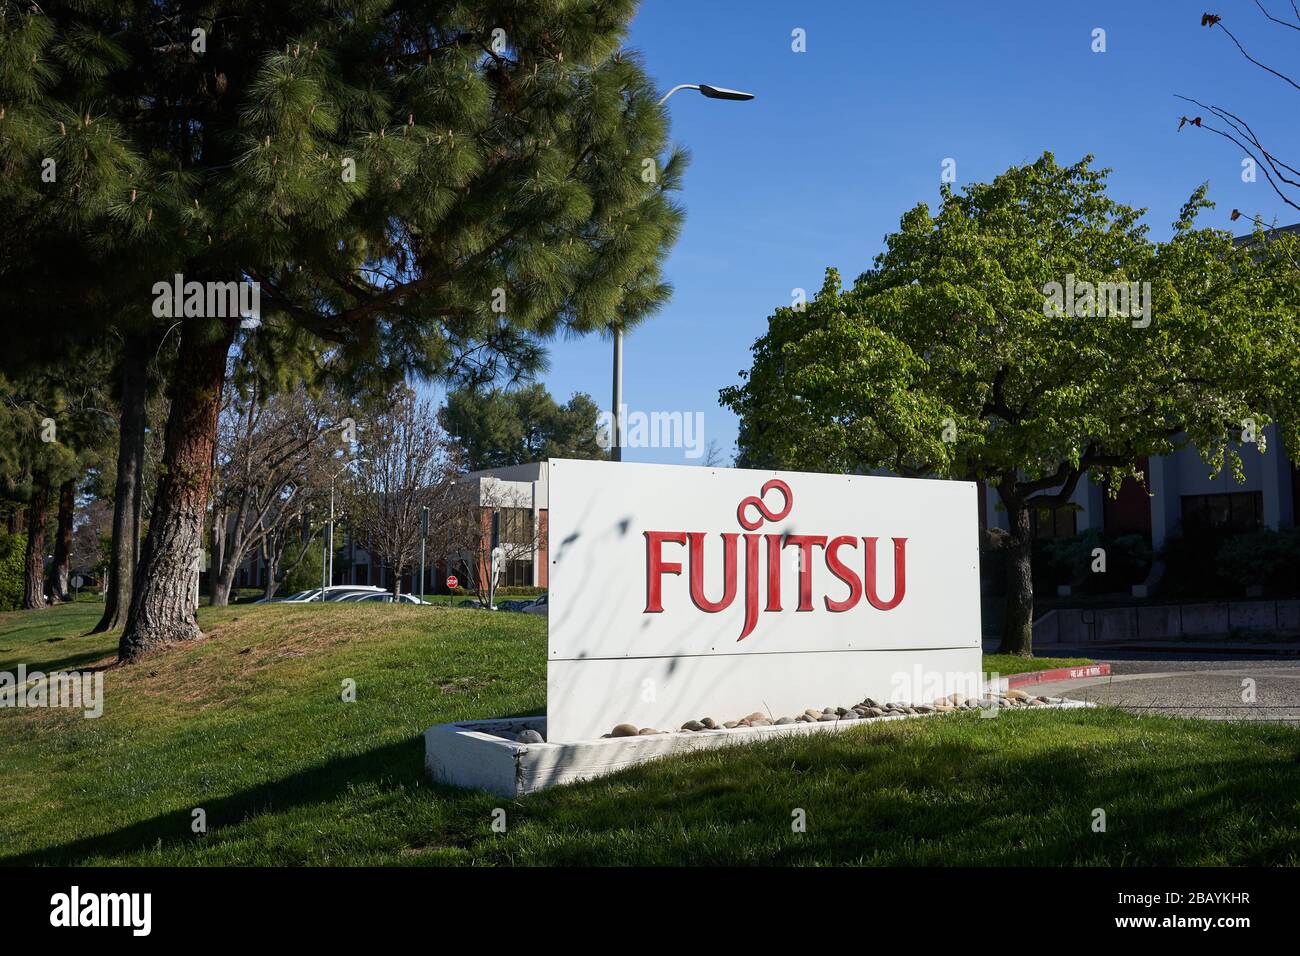 Fujitsu Laboratories of America in the Silicon Valley, California. Fujitsu Ltd. is a Japanese information technology equipment and services company. Stock Photo